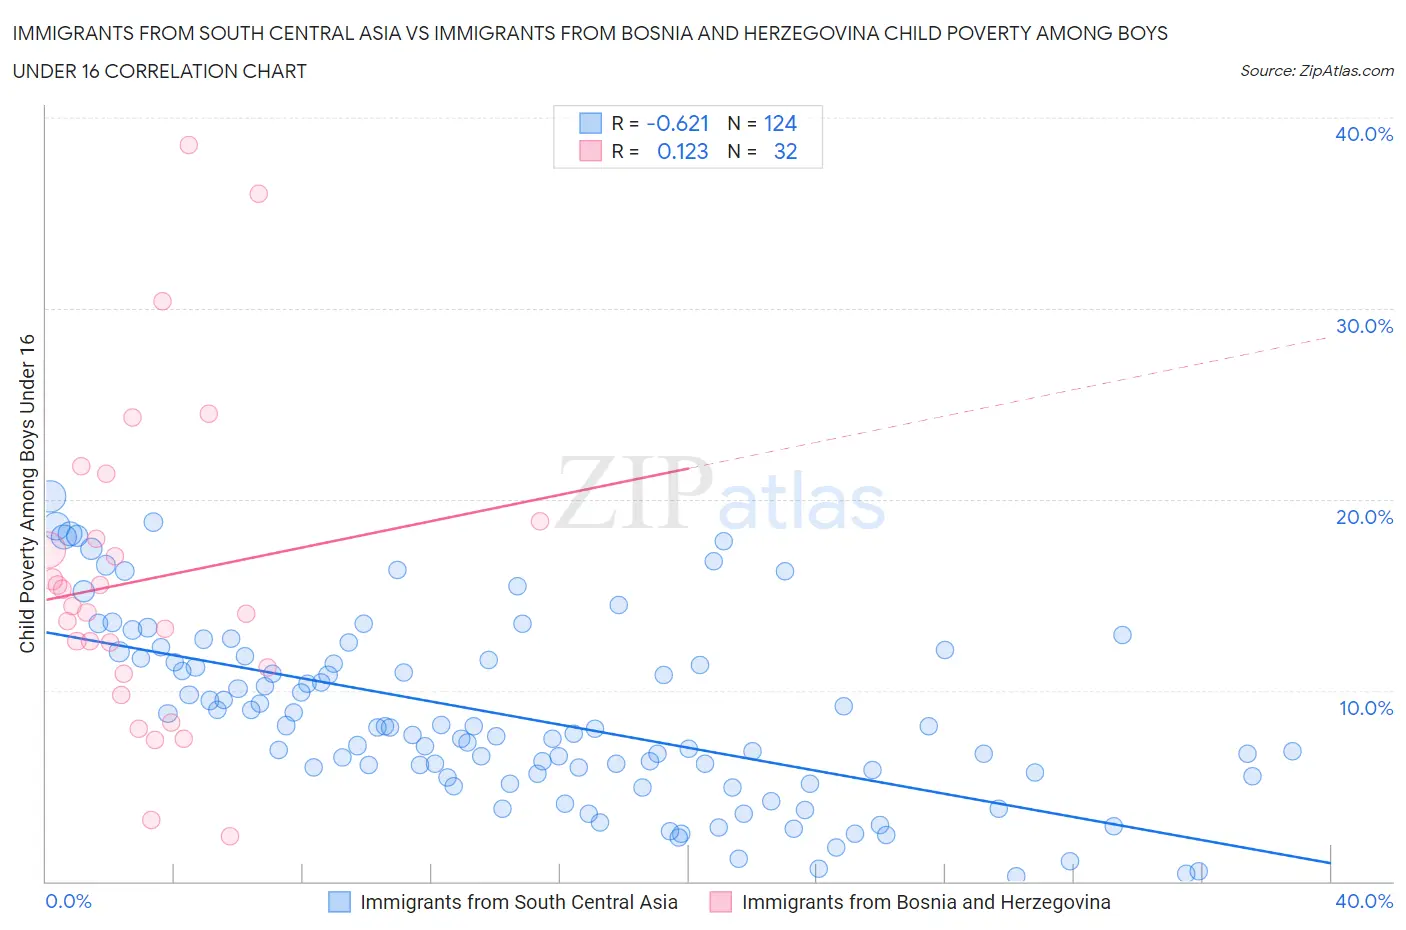 Immigrants from South Central Asia vs Immigrants from Bosnia and Herzegovina Child Poverty Among Boys Under 16